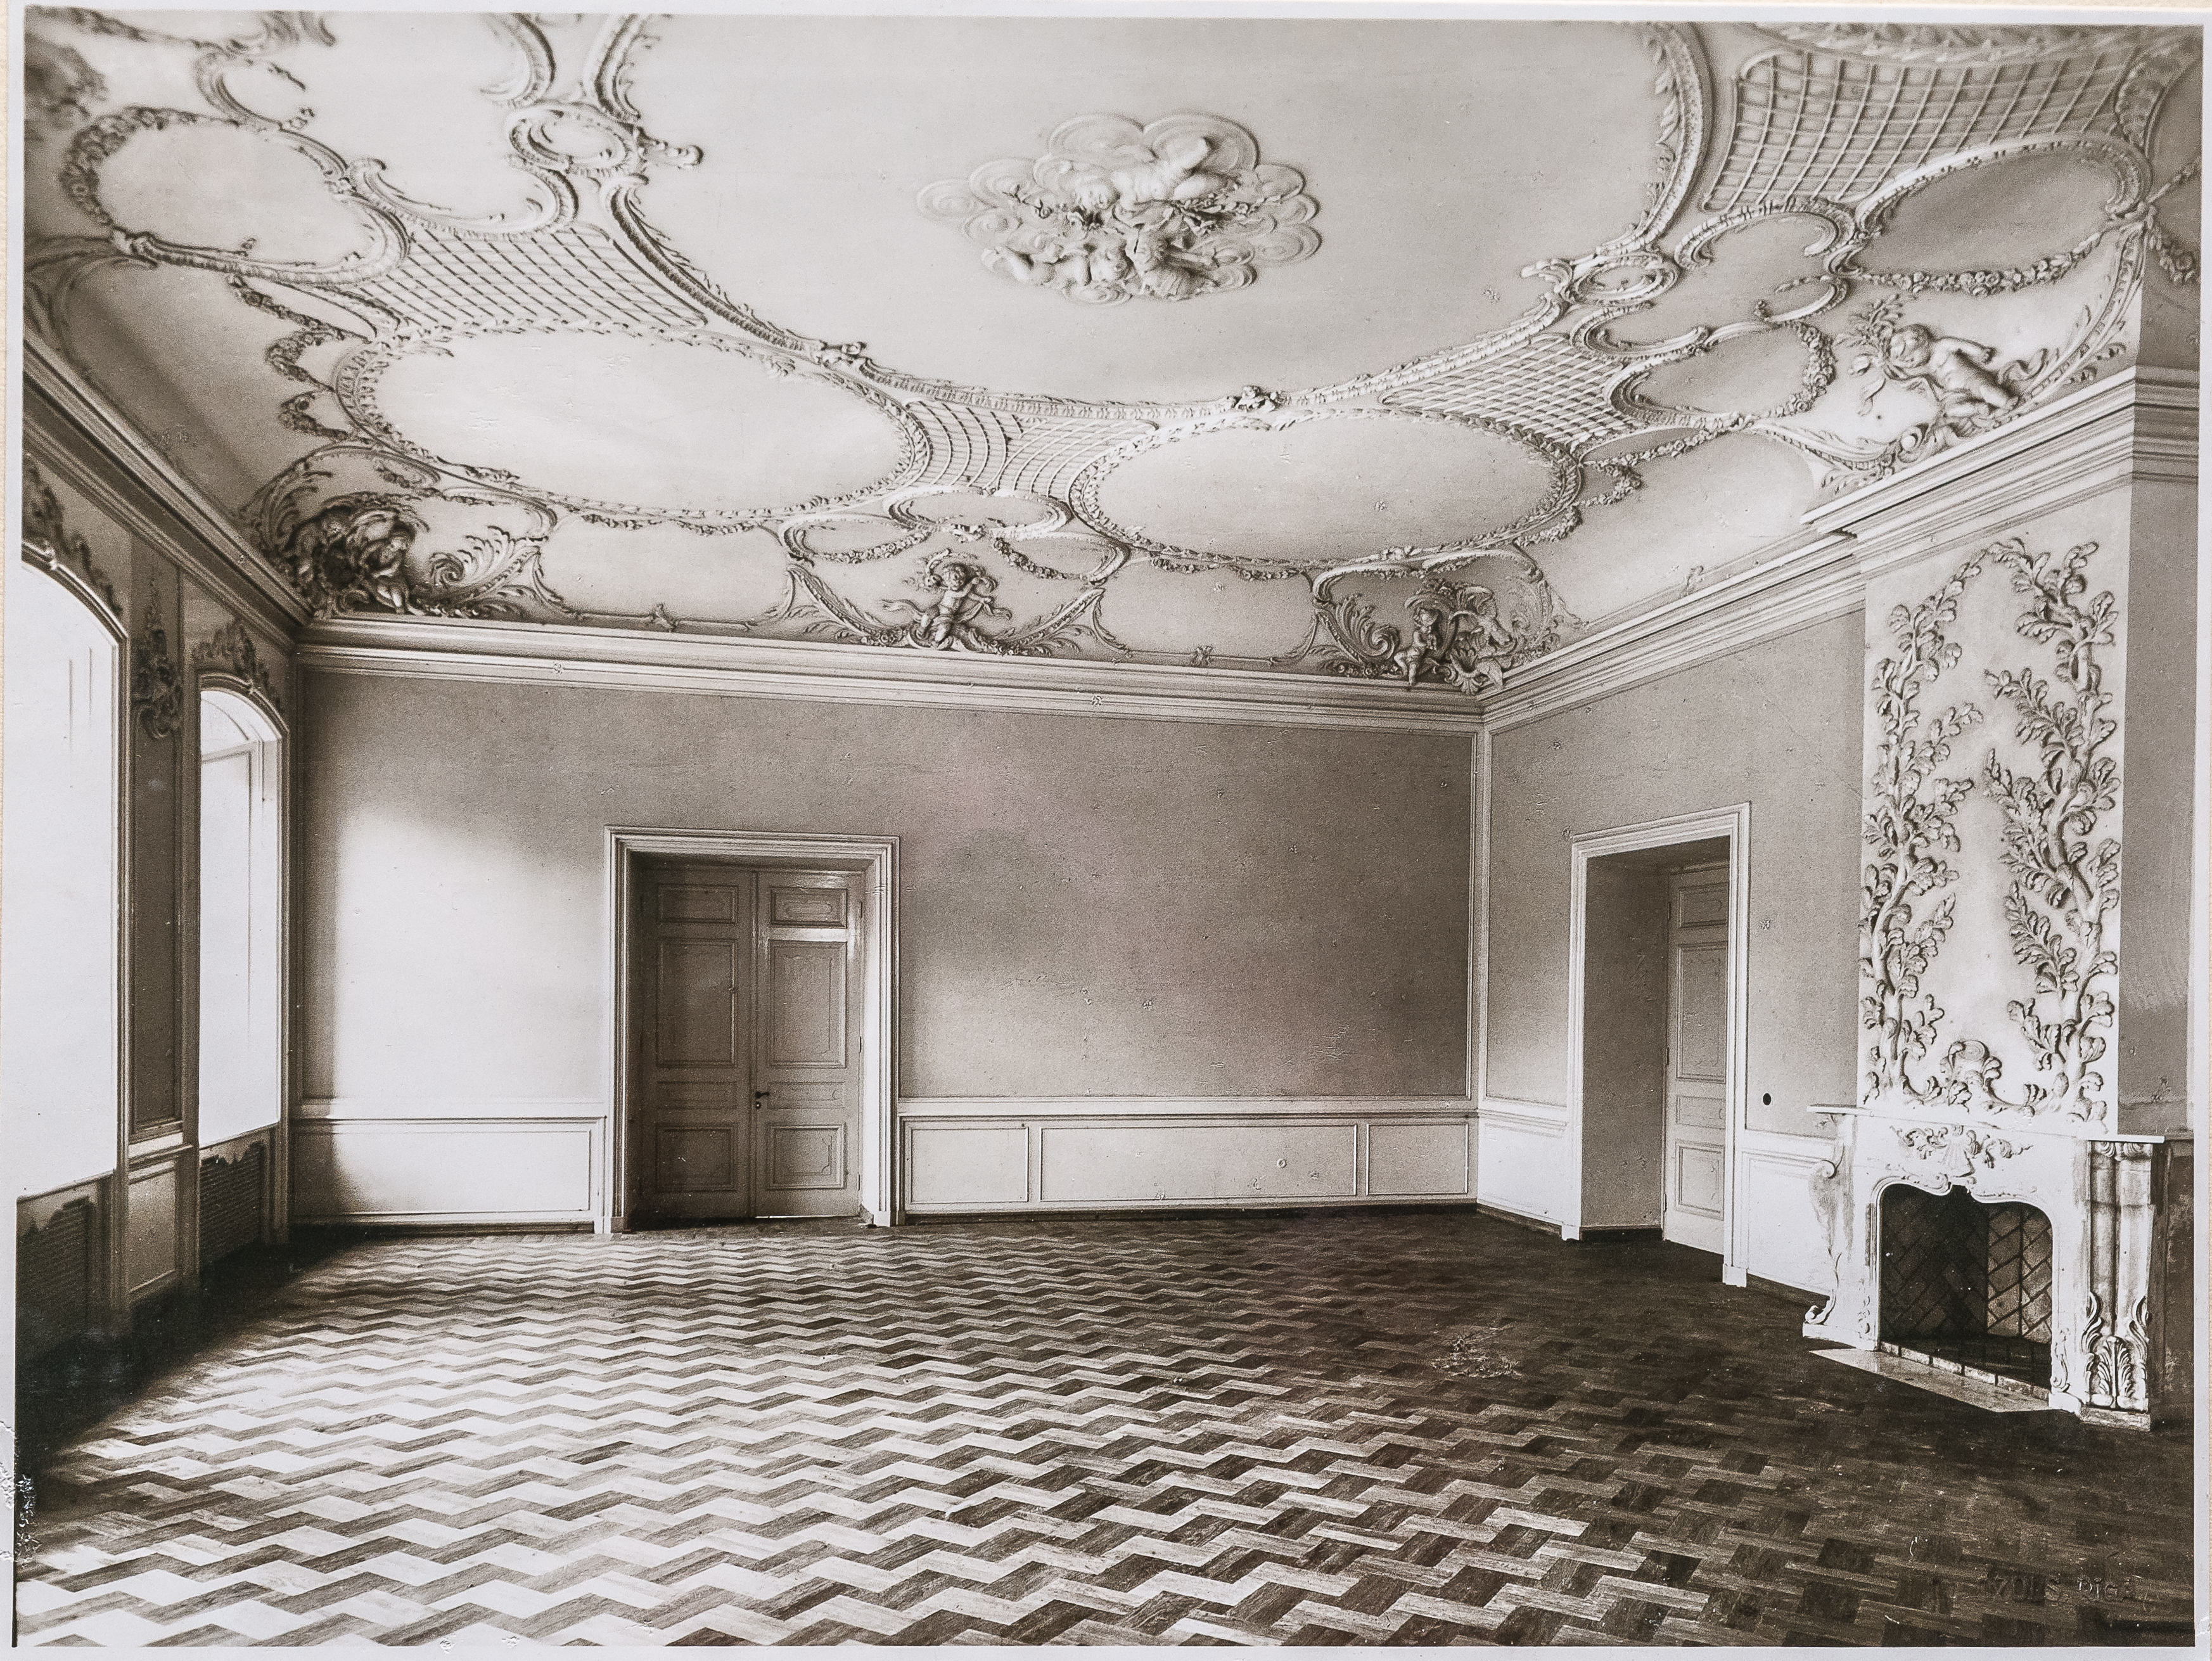 <p style="margin-bottom:11px"><strong>SILVER HALL</strong></p>  <p>In the Silver Hall there was a fireplace, the main part of which was decorated by two branches of trees with lush foliage, covered with silver ornaments.</p>  <p>In the 19th century, this hall was called the Blue Hall. This shows that the silver was contrasted with a blue hue. During the Jelgava Academy of Agriculture, the office of the vice-rector and the meeting room were located here.</p>  <p>Today this room is used for various seminars, conferences and other events. During summers, wedding ceremonies are also organized here.</p>